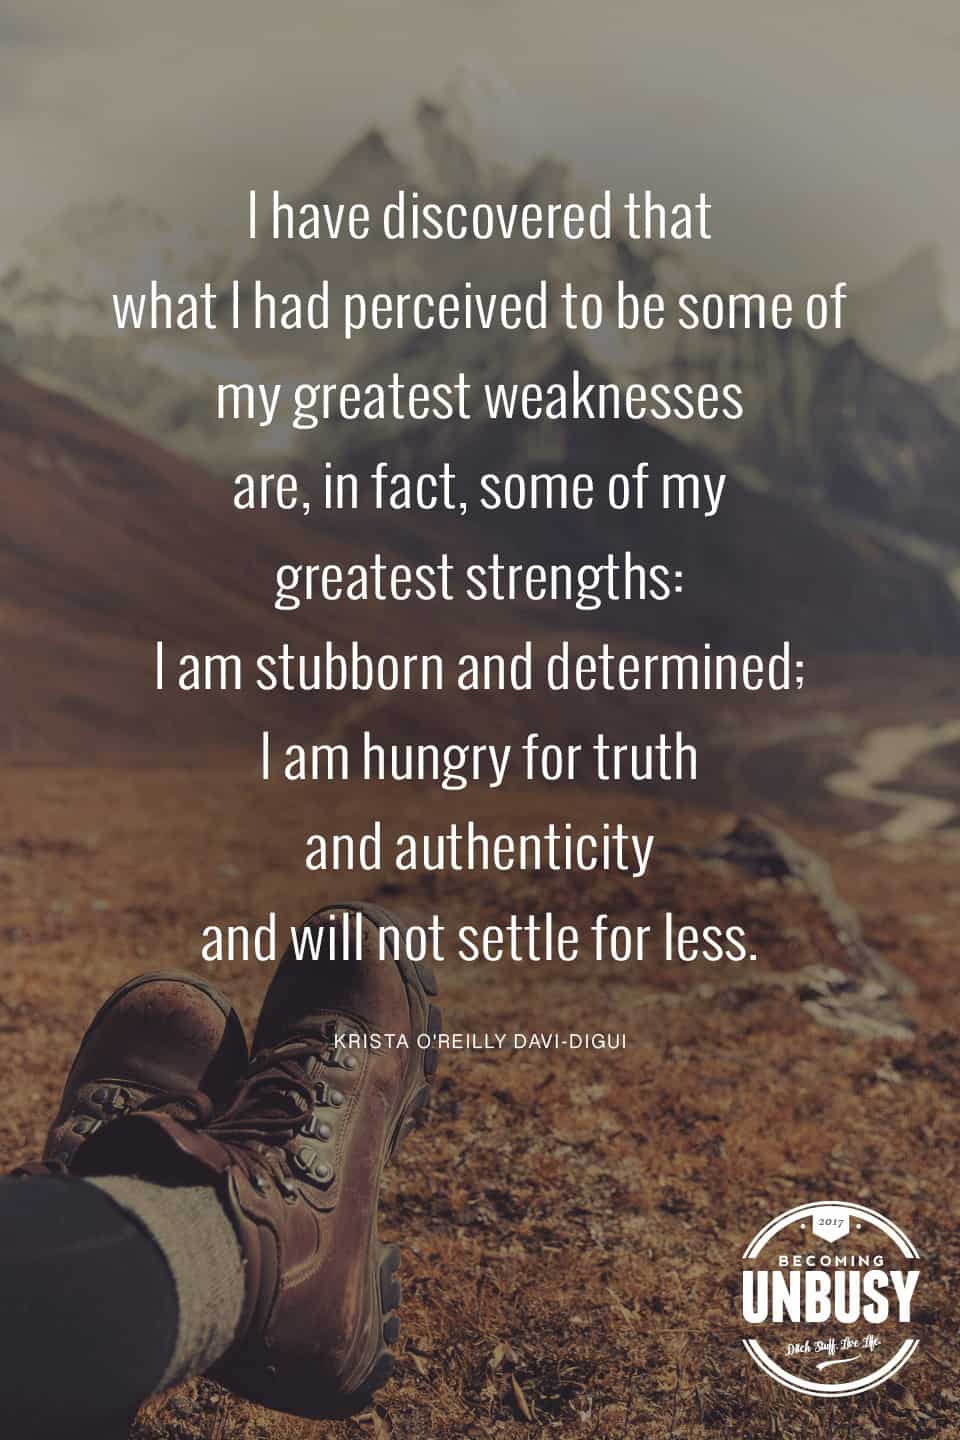 I discovered that what I had perceived to be some of my greatest weaknesses are, in fact, some of my greatest strengths: I am stubborn and determined; I am hungry for truth and authenticity and will not settle for less. *Love this quote and this Becoming UnBusy site.